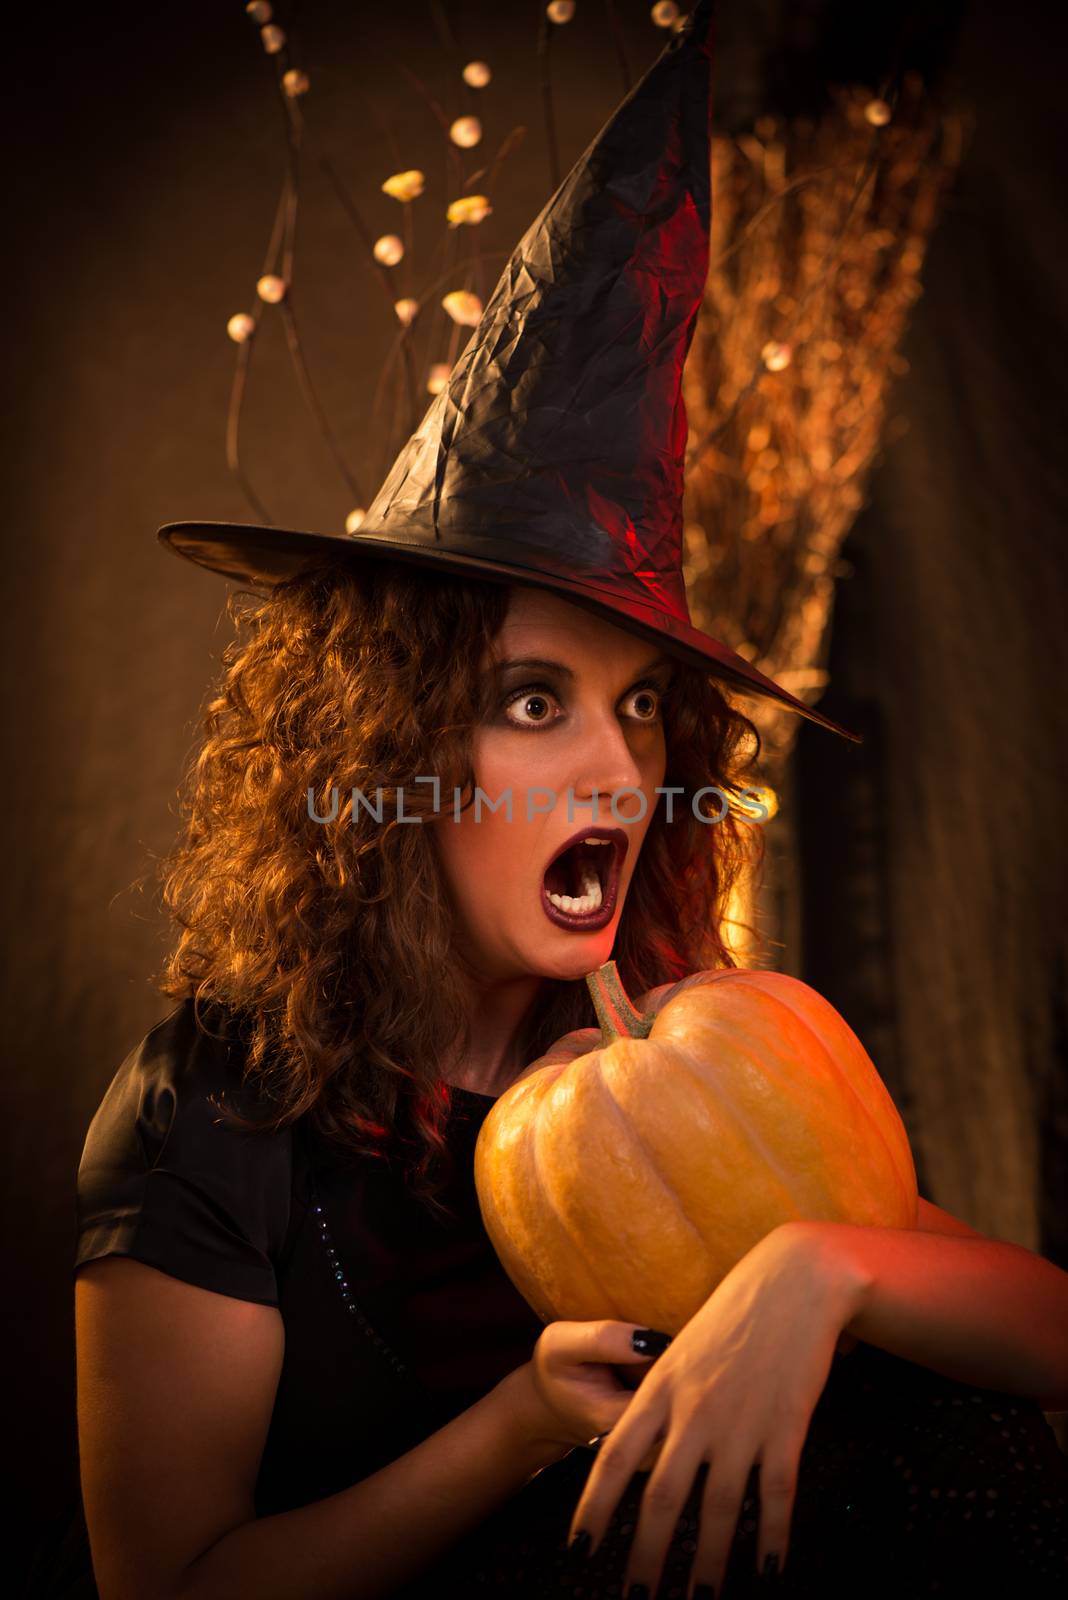 Portrait of young woman with scared face dressed like a witch. She wears dark clothing and holding a pumpkin in hands.